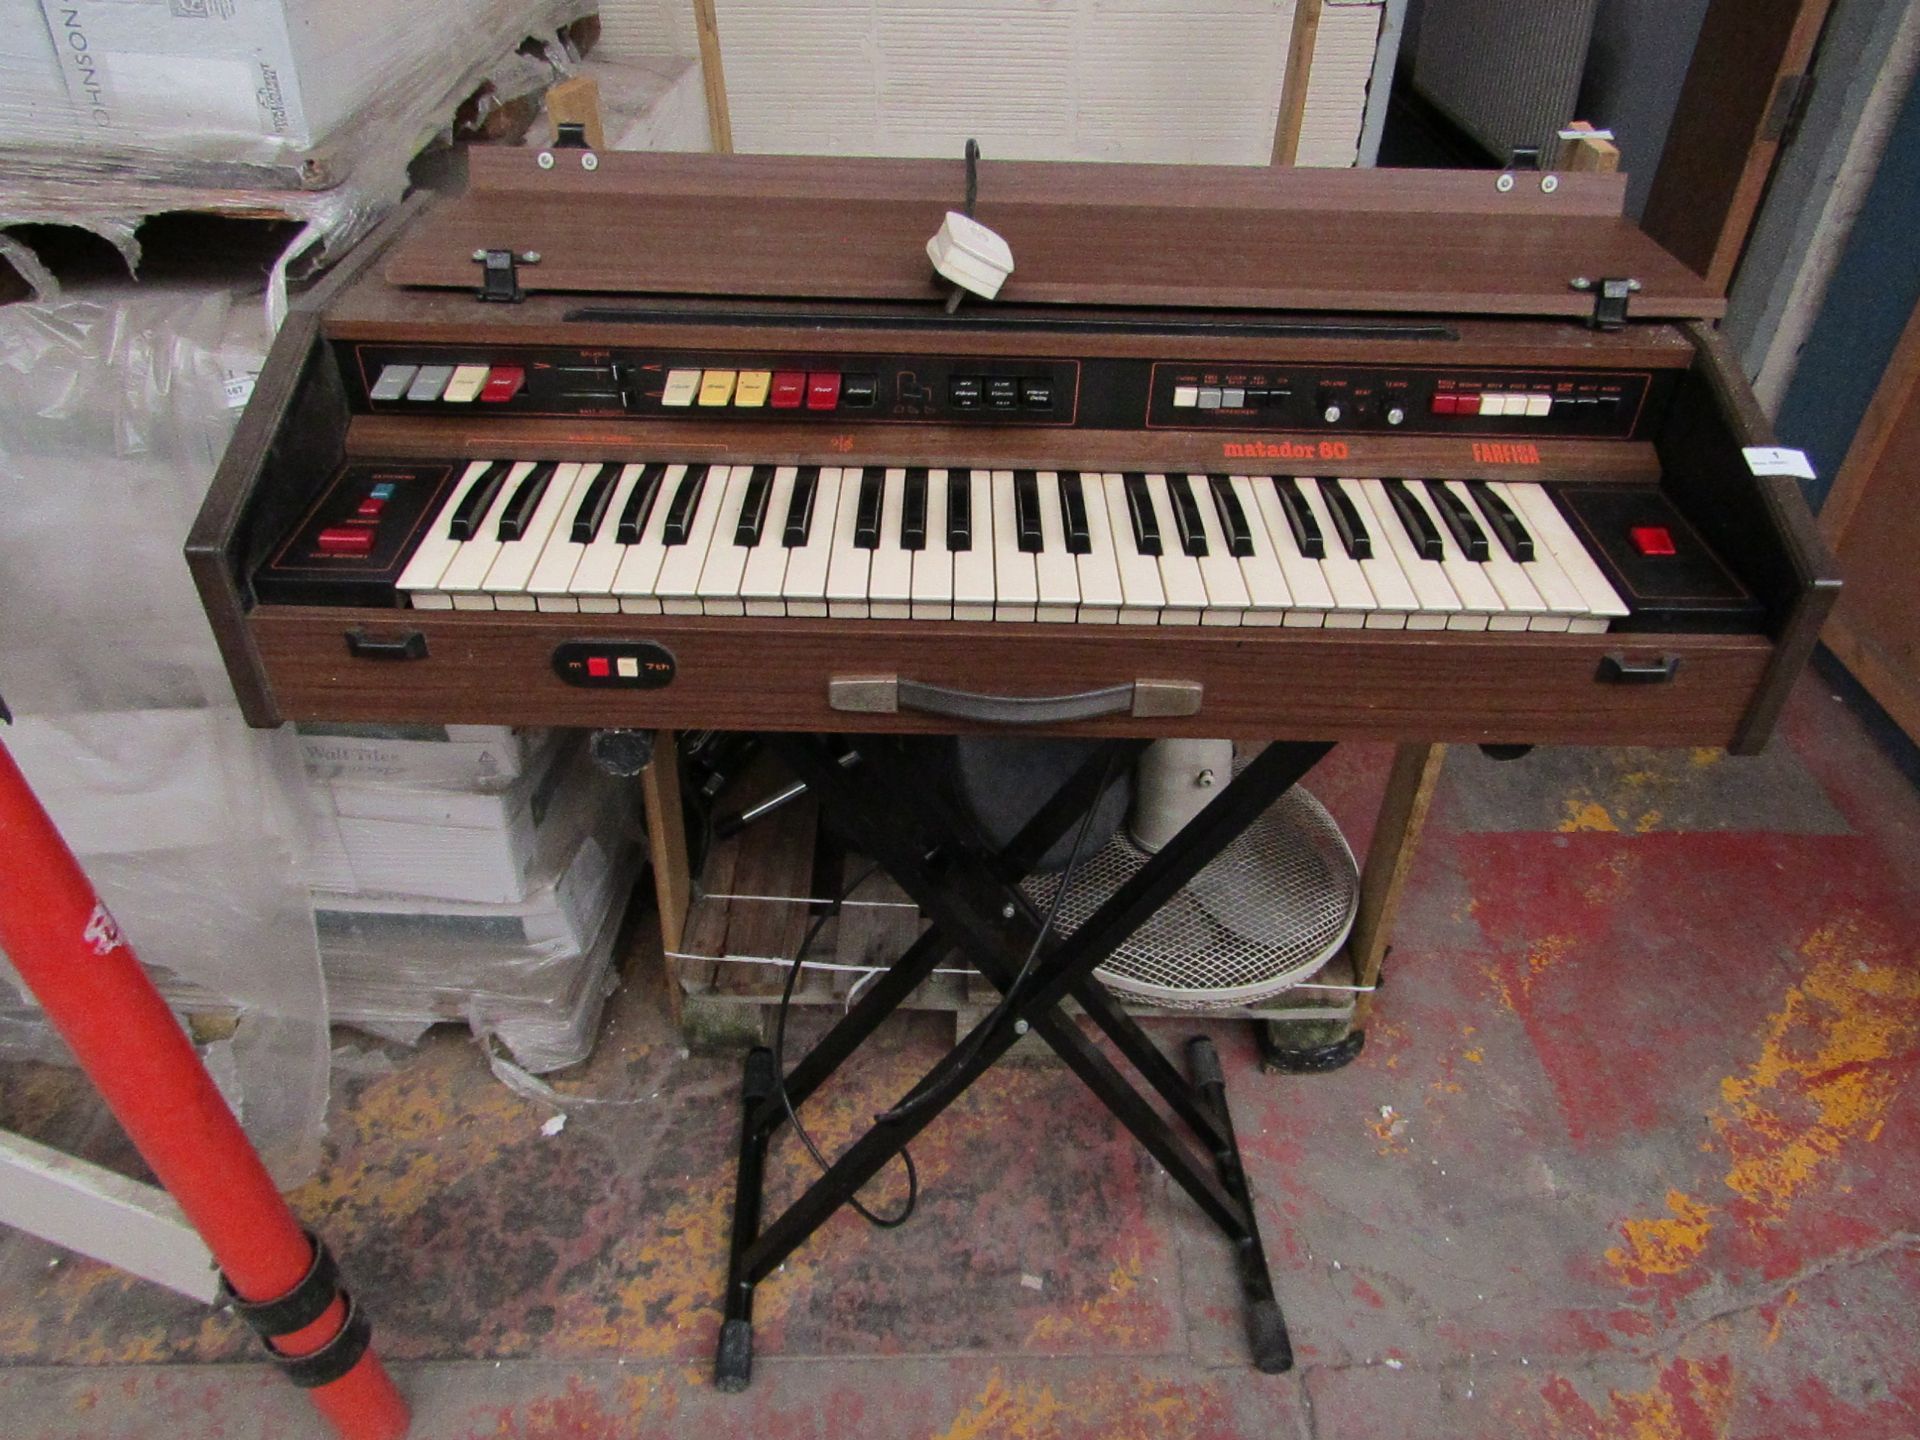 Farfisa Matador 80 Vintage Organ sat on a Fold away Keyboard stand, powers on but we haven't